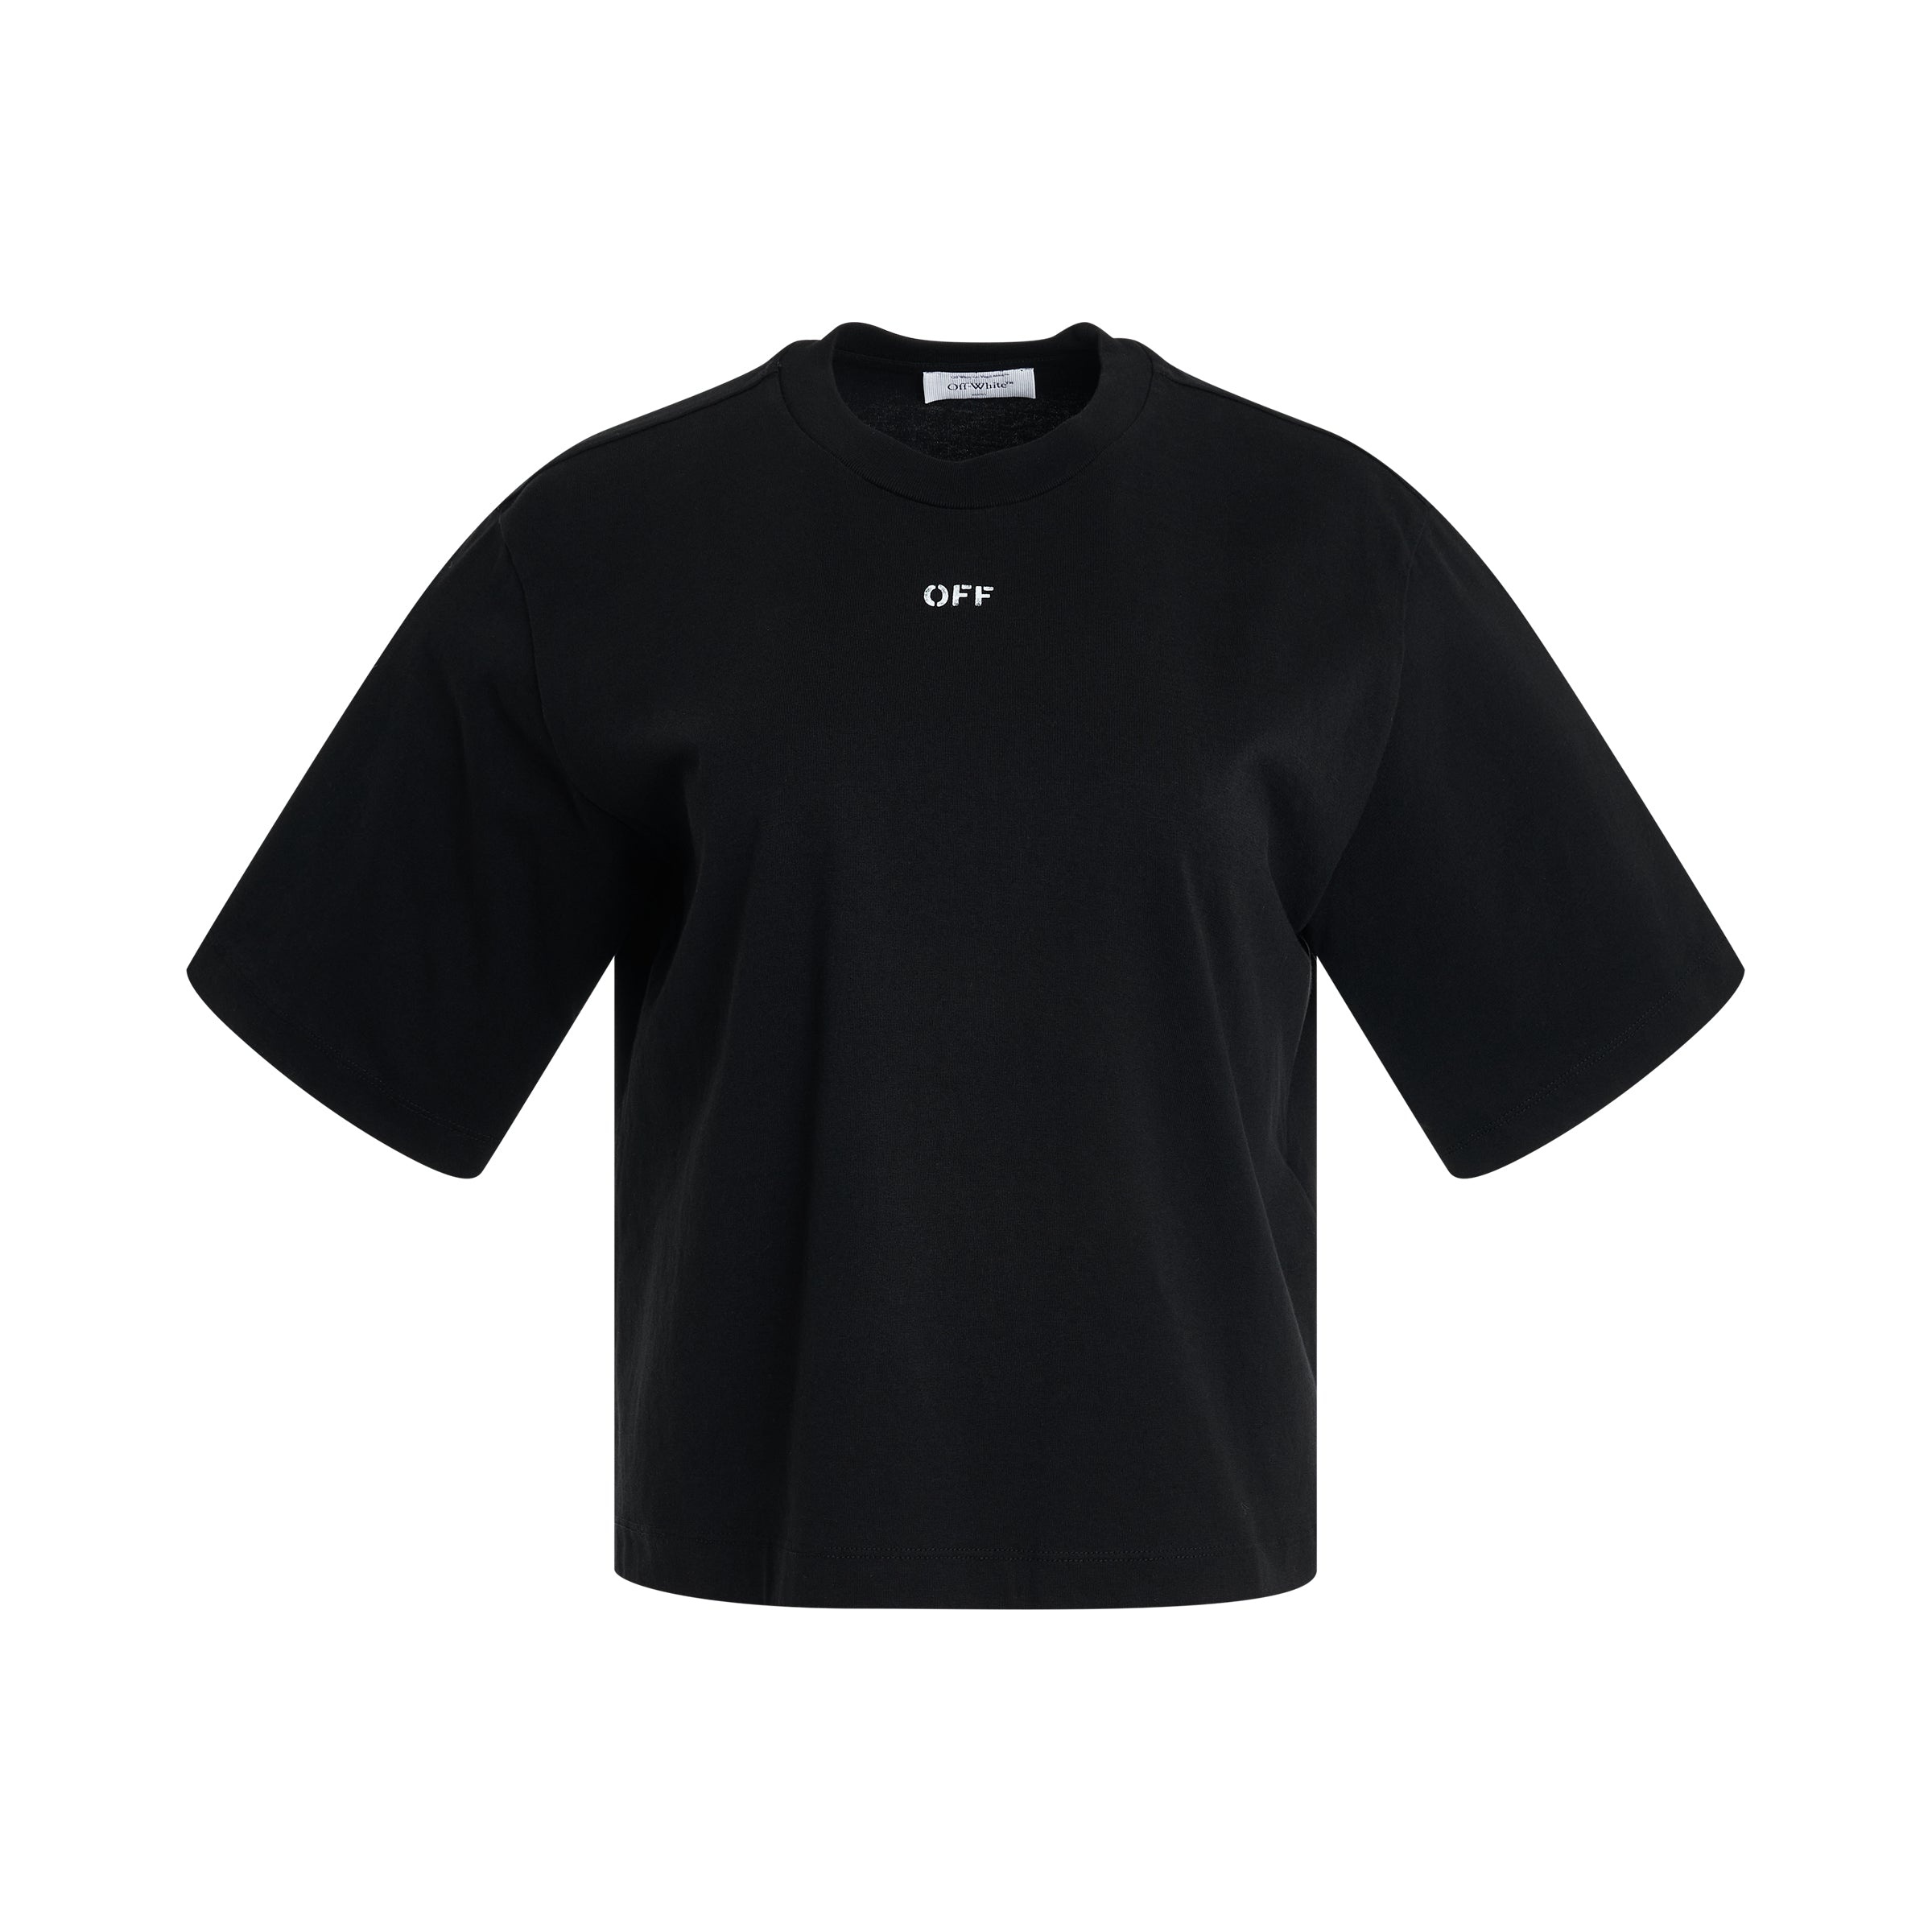 Embroidered Arrow Basic T-Shirt in Black - 1